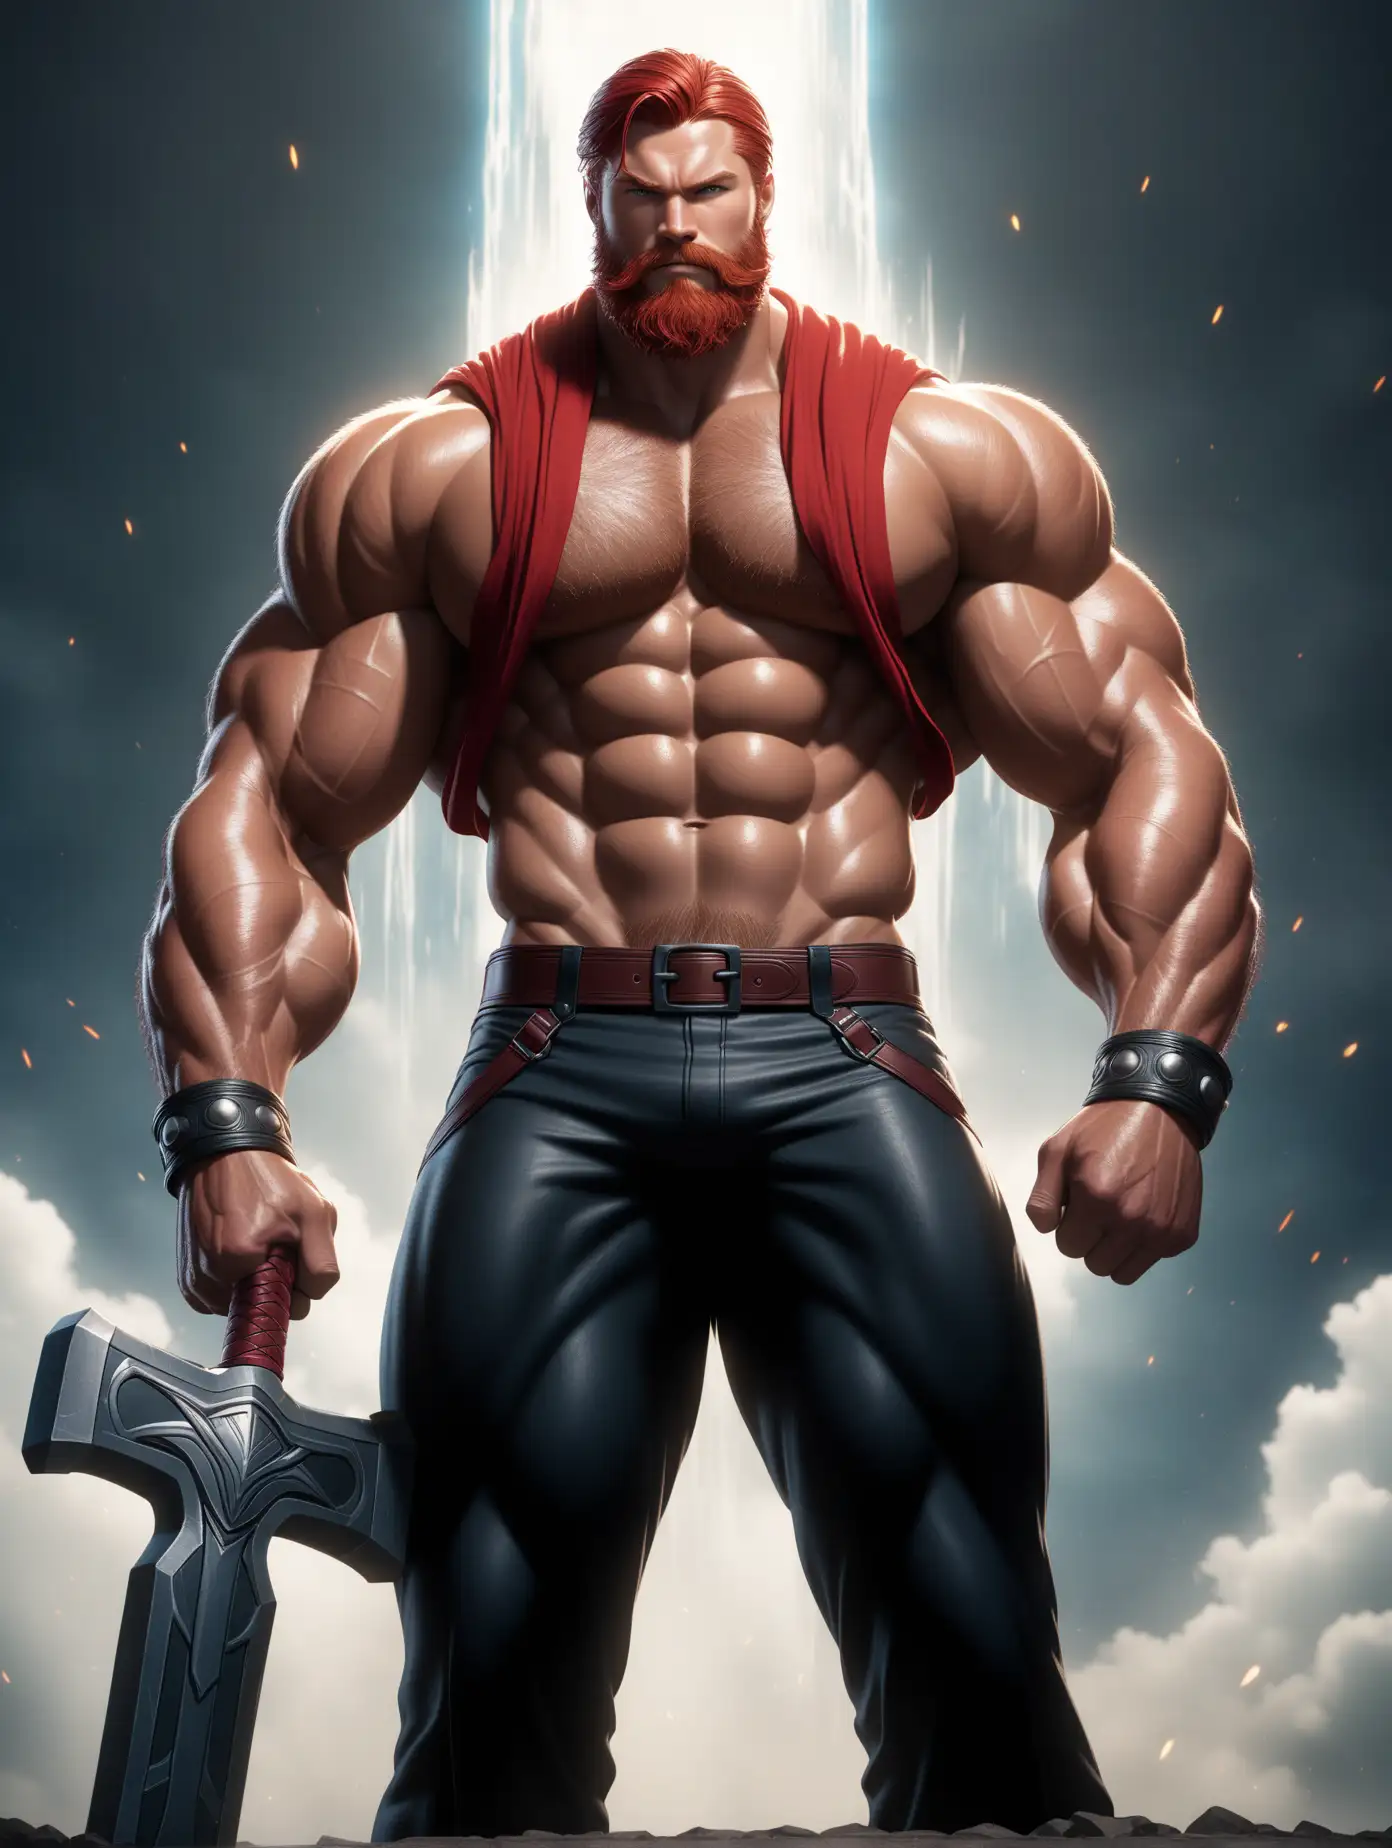 very hot Thor | Record of Ragnarok. beard hair. handsome face. long luxurious red hair. with giant bulge. Ultra high definition. Humongous muscles. very muscular. Gigantic torso. abs. very intricately and microscopically detailed. ultra realistic blender sfm textures. white button down shirt. red bandana/ascot around neck. broad shoulders. full body. abs. obliques. wide shot. holding mjolnir and stormbreaker. his monumental brawny frame. his considerable pectorals colossally strapping. his seductive robust. his thick arms biceps triceps obliques. cinematic lighting and cinematic shading
